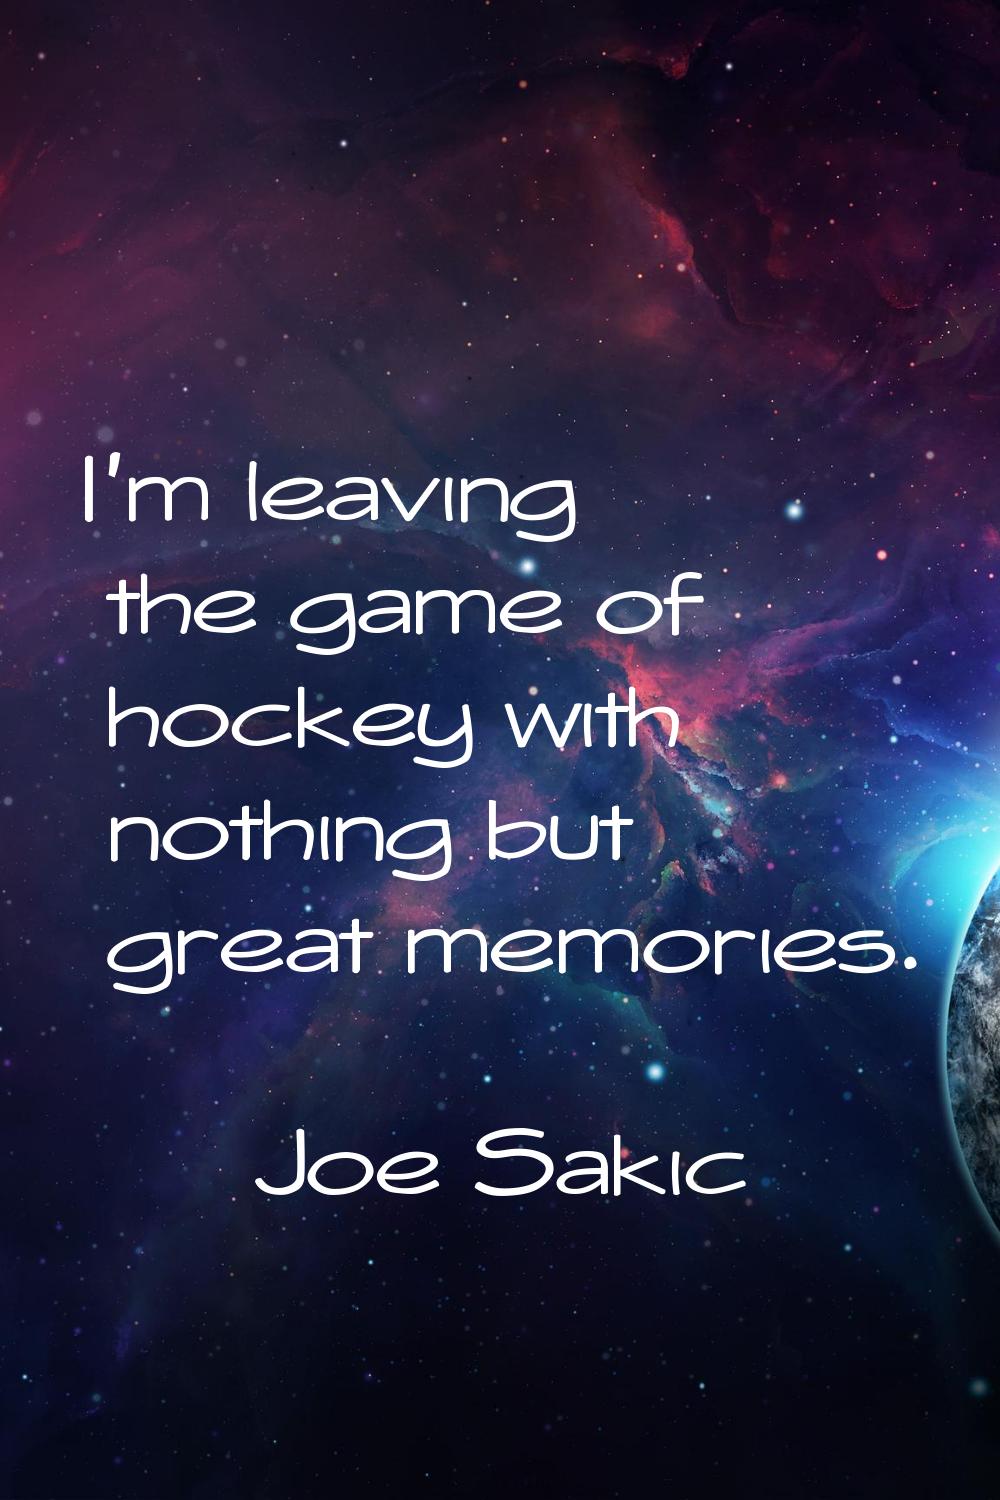 I'm leaving the game of hockey with nothing but great memories.